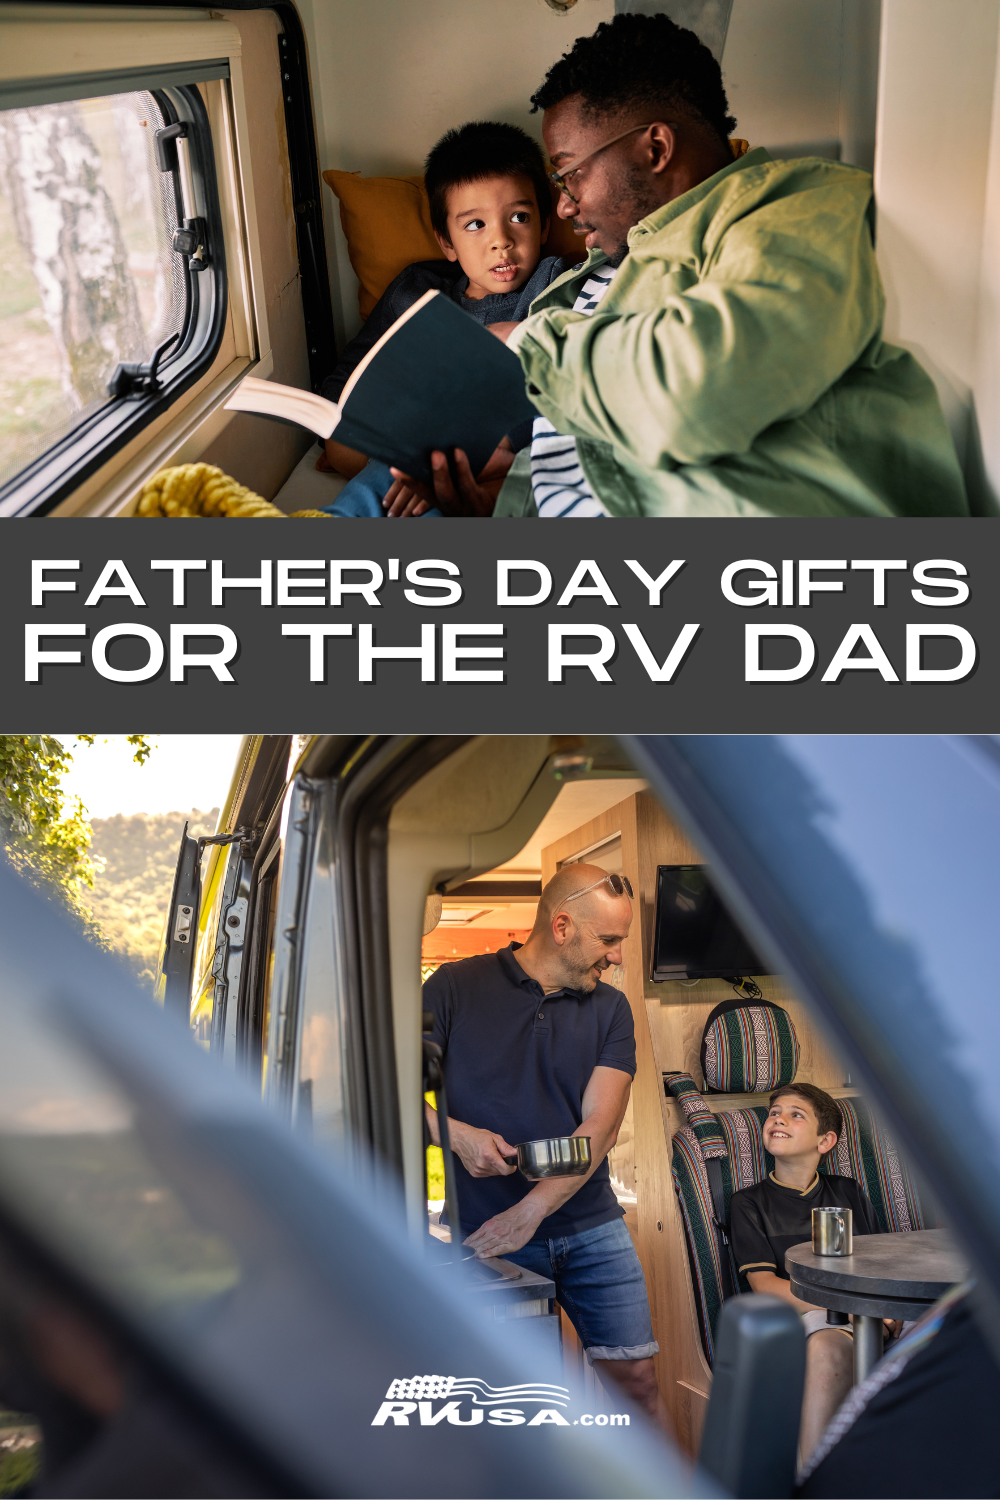 A boy reads a book with his dad in an RV. A dad cooks dinner for his son in an RV. Text reads "Father's Day gifts for the RV dad"